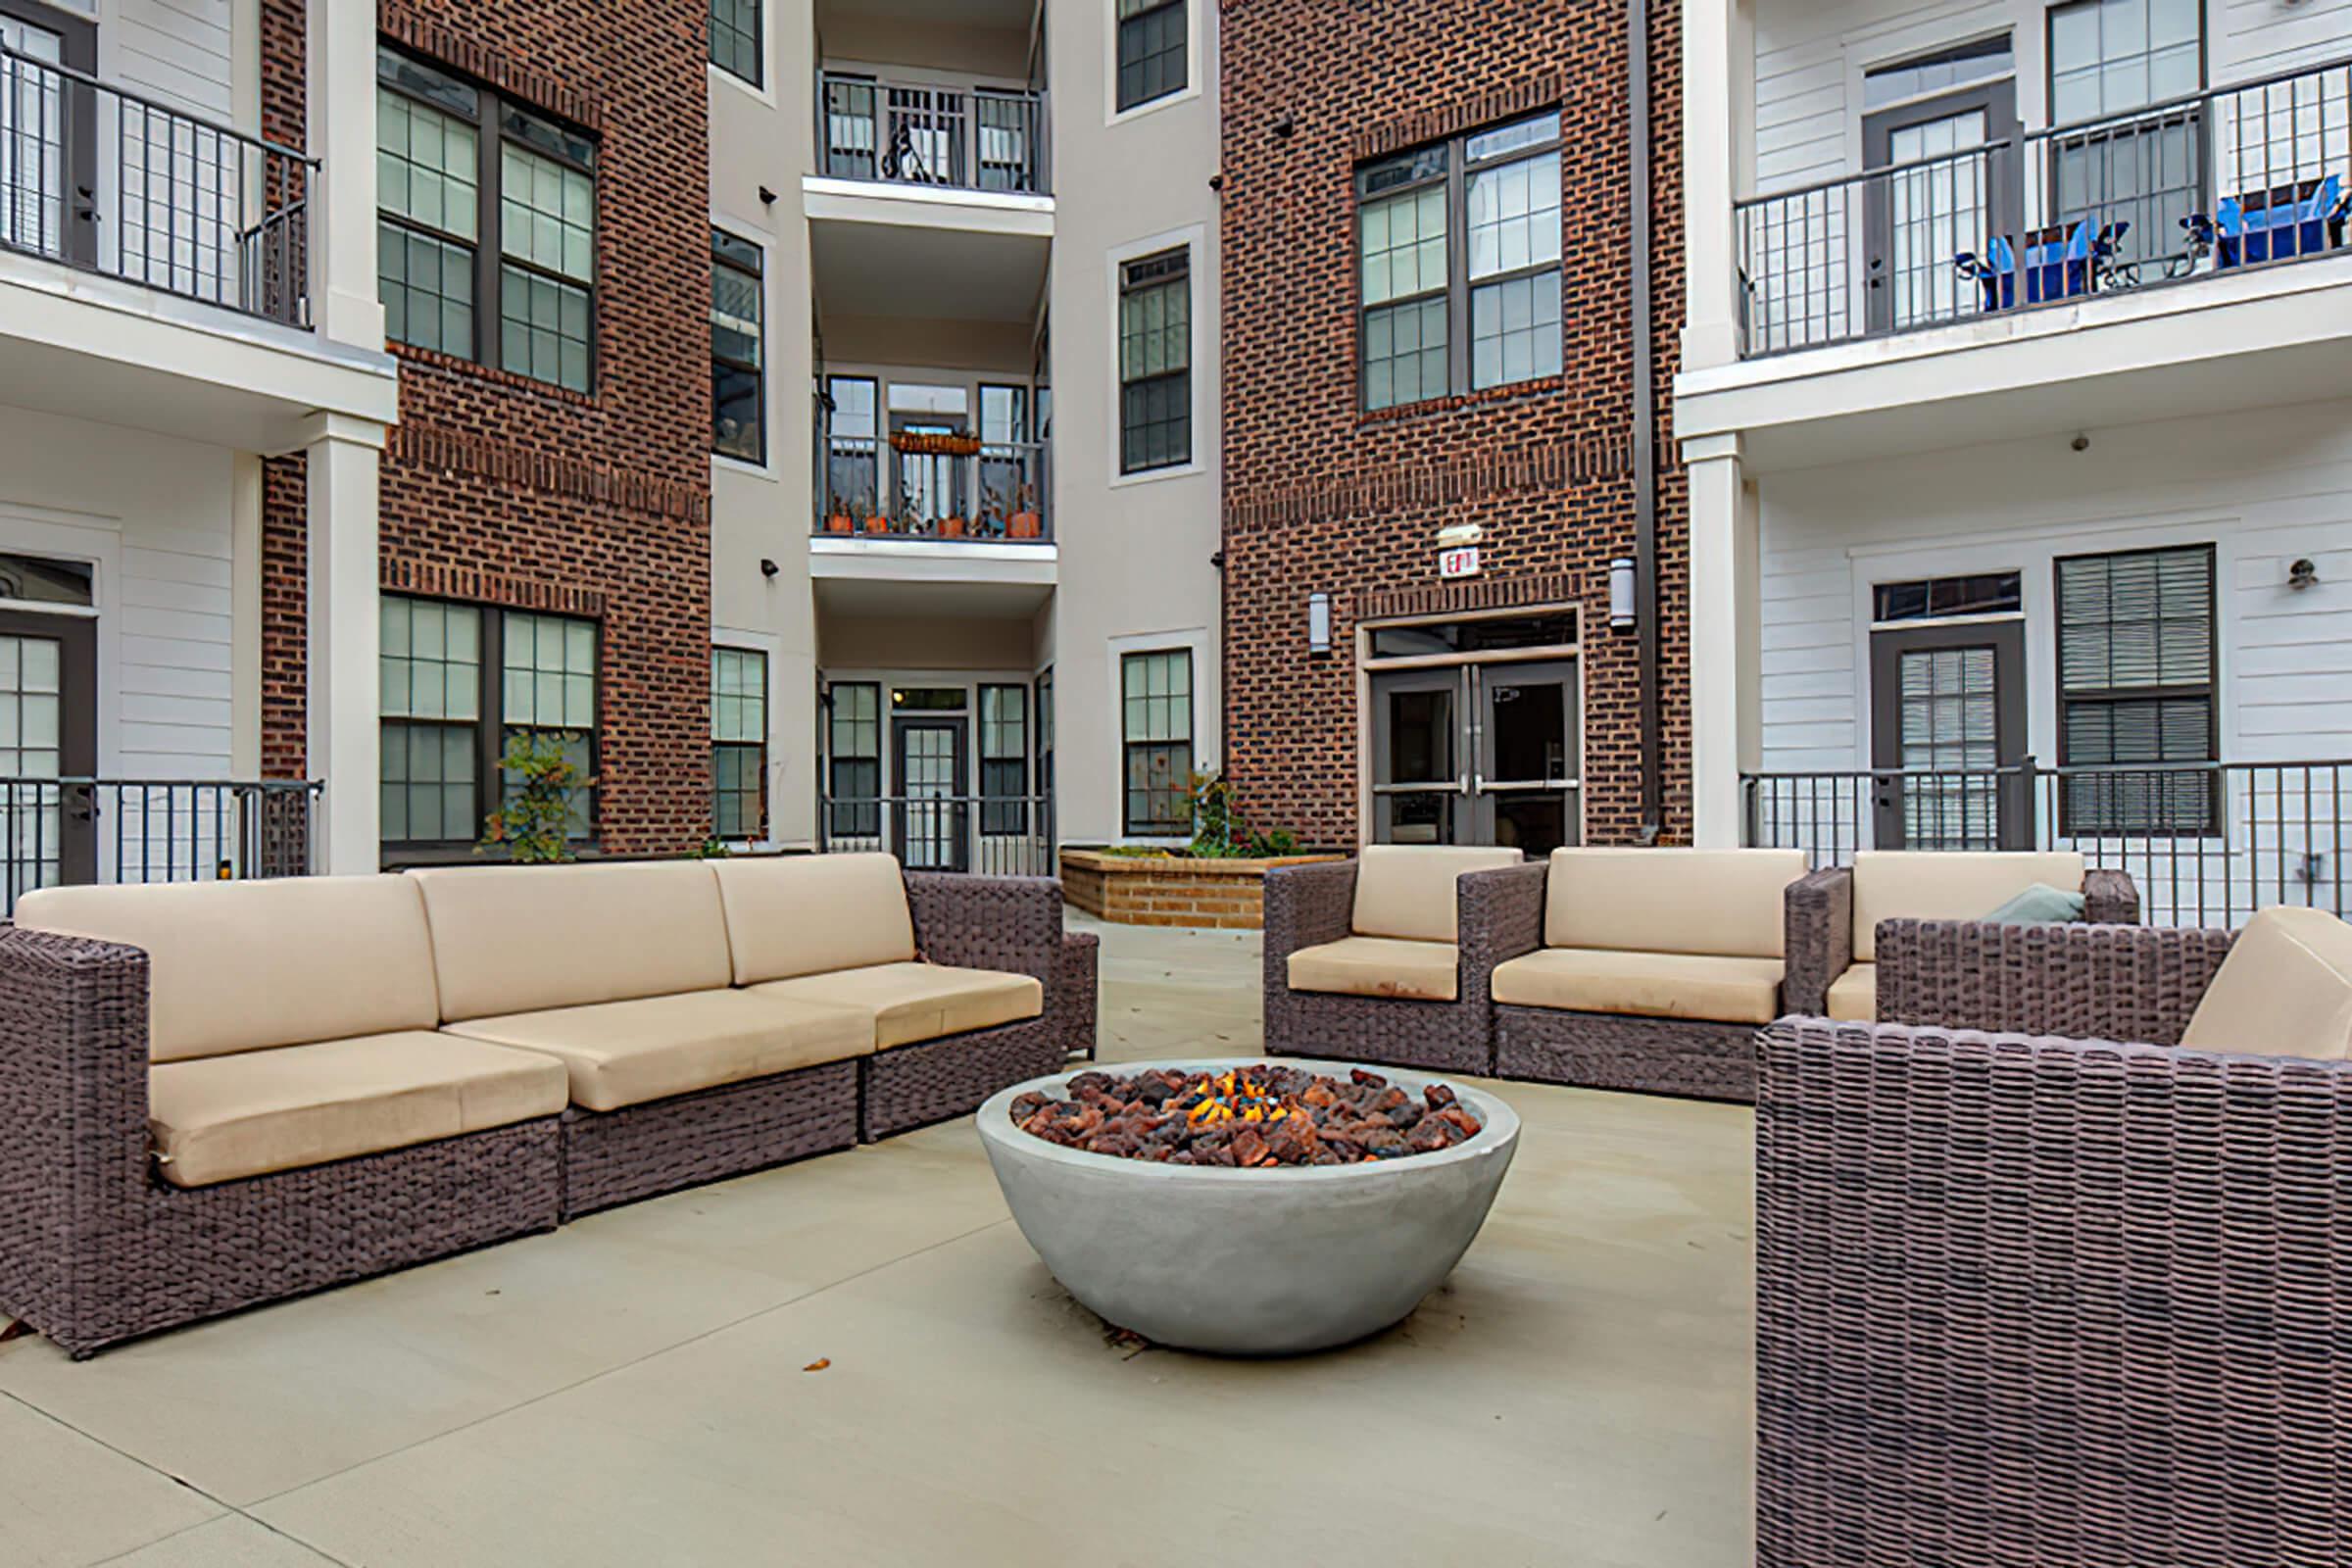 Private Courtyard at 1810 Belcourt